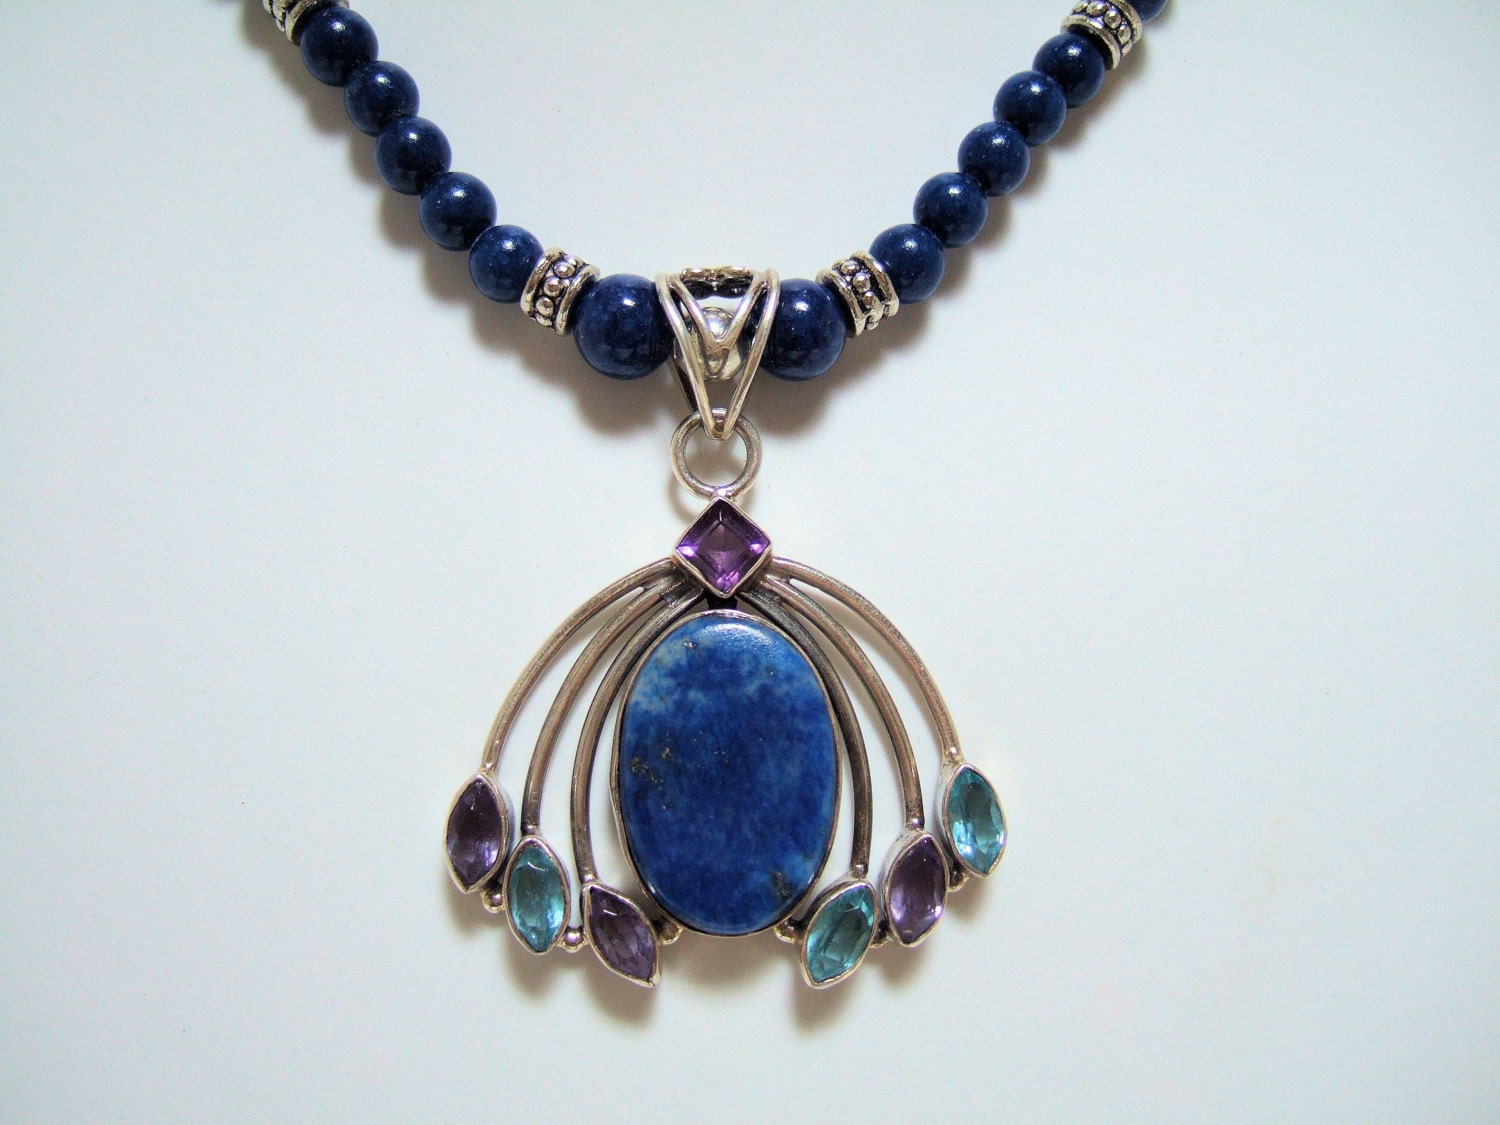 Exquisite Blue Lapis Statement Necklace with by JewelrybyIshi